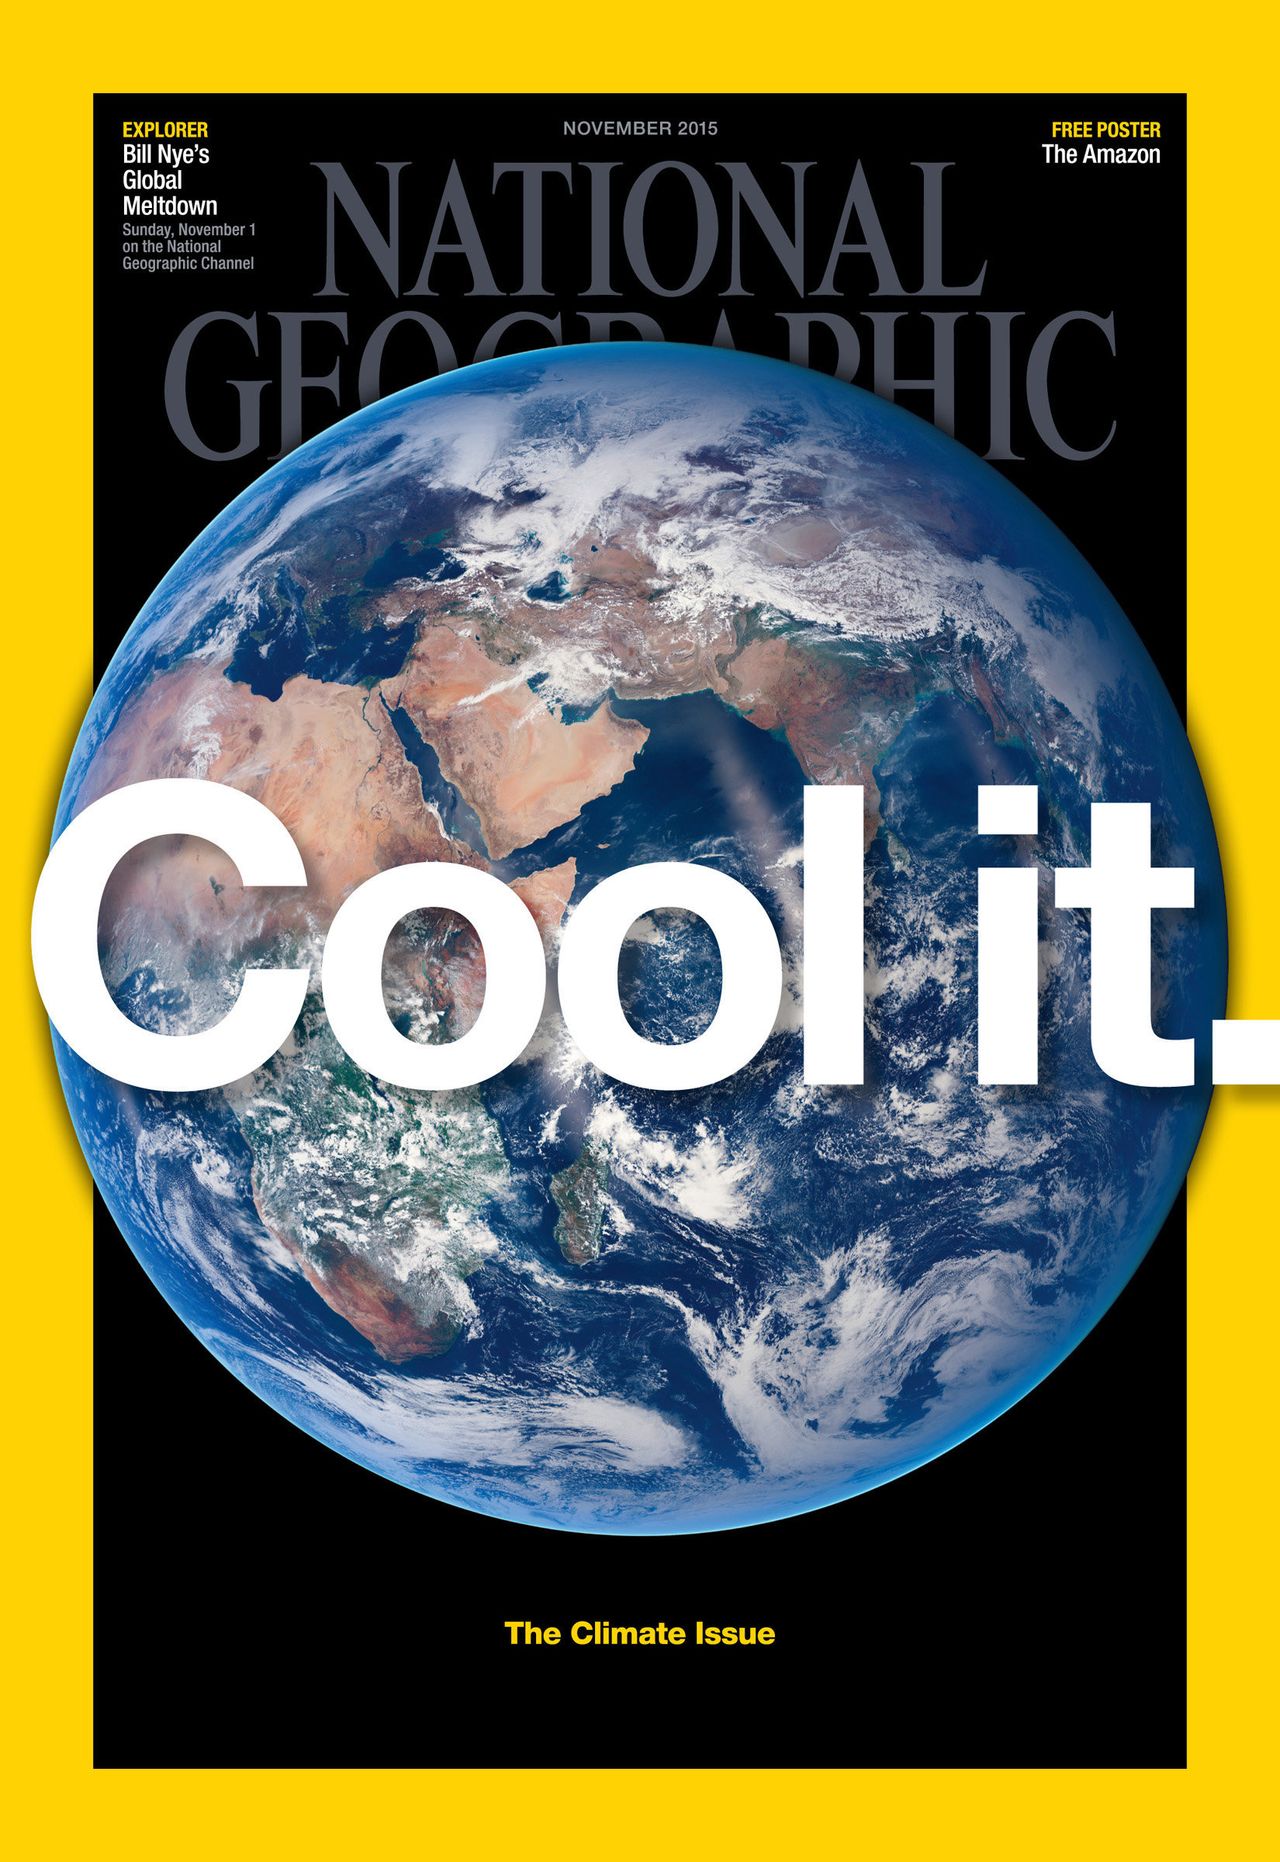 Jazbec's photos are featured in National Geographic's November 2015 issue on climate change.